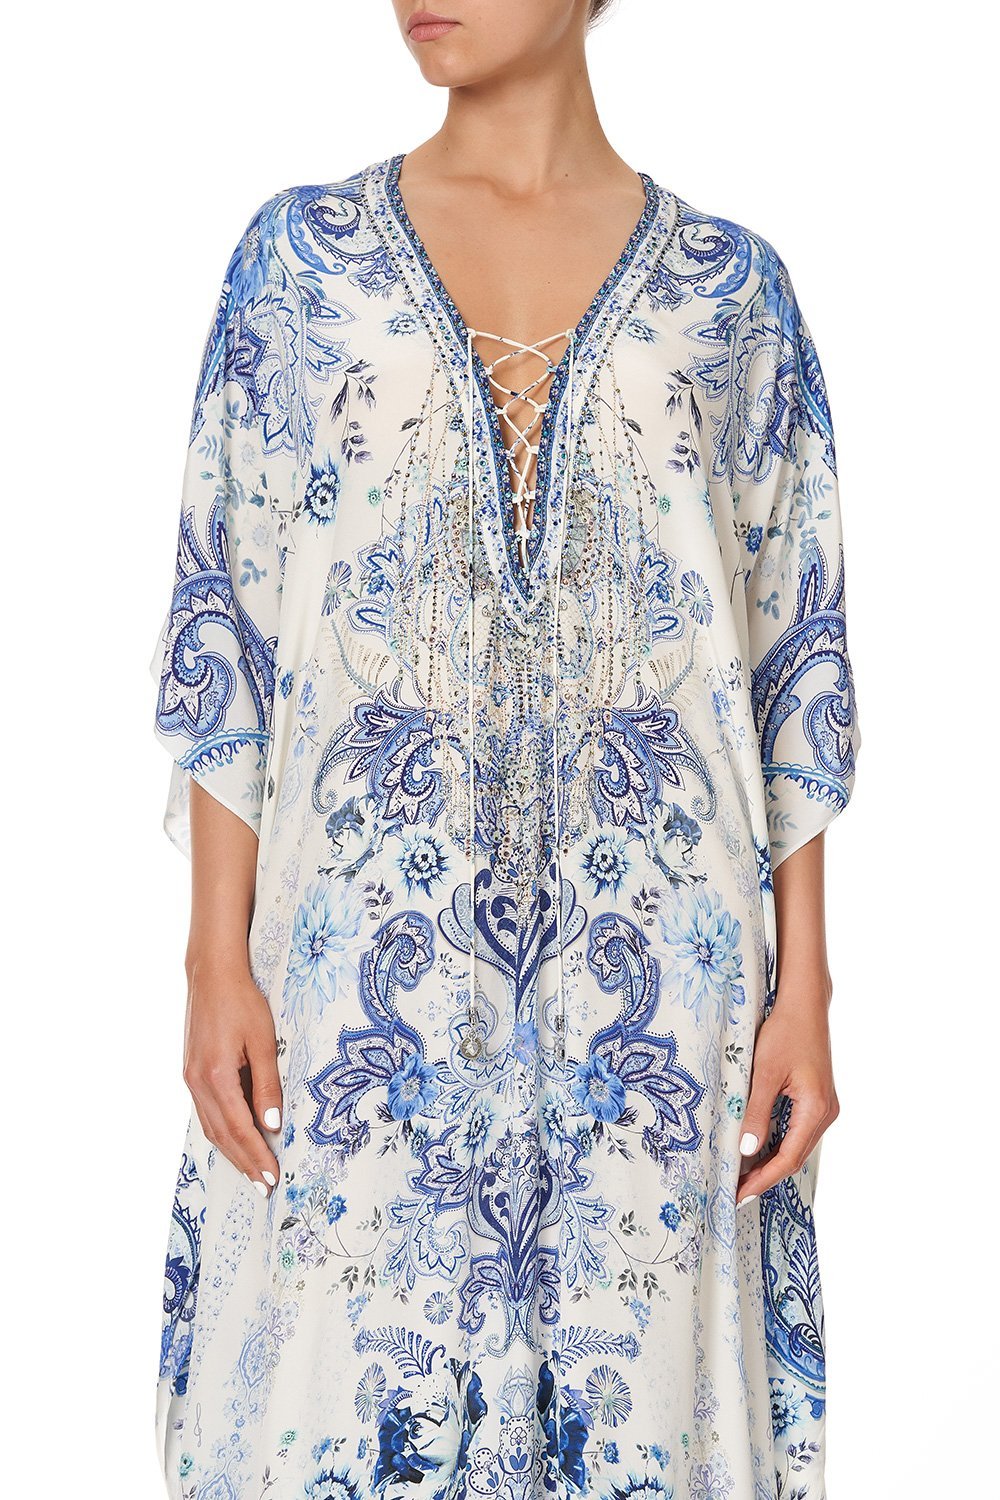 LACE UP KAFTAN TALKING ABOUT A REVOLUTION